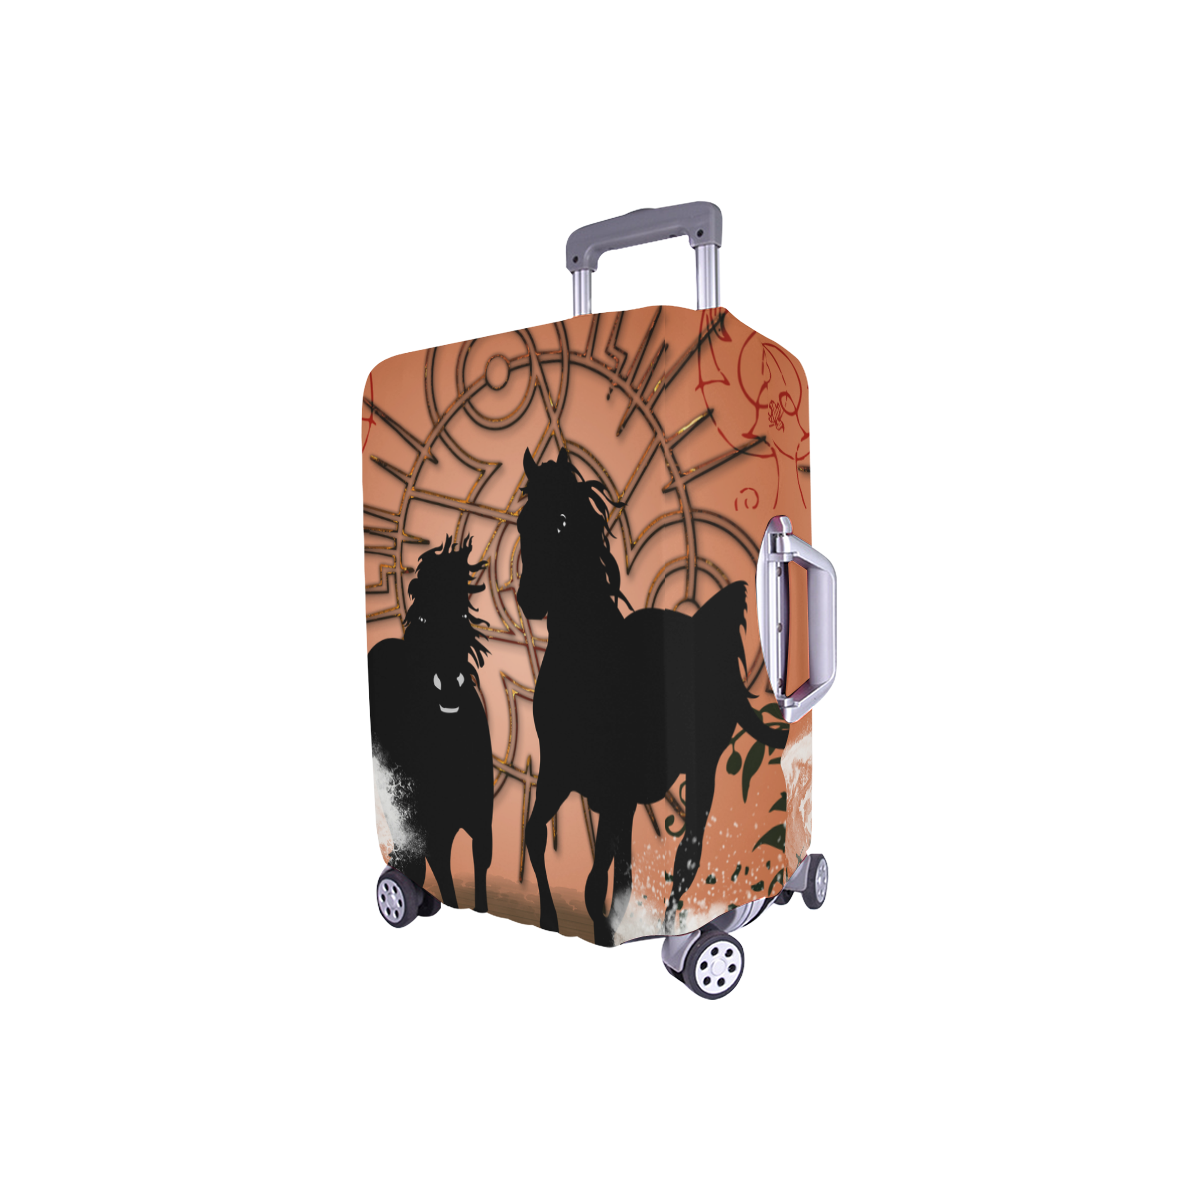 Black horse silhouette Luggage Cover/Small 18"-21"